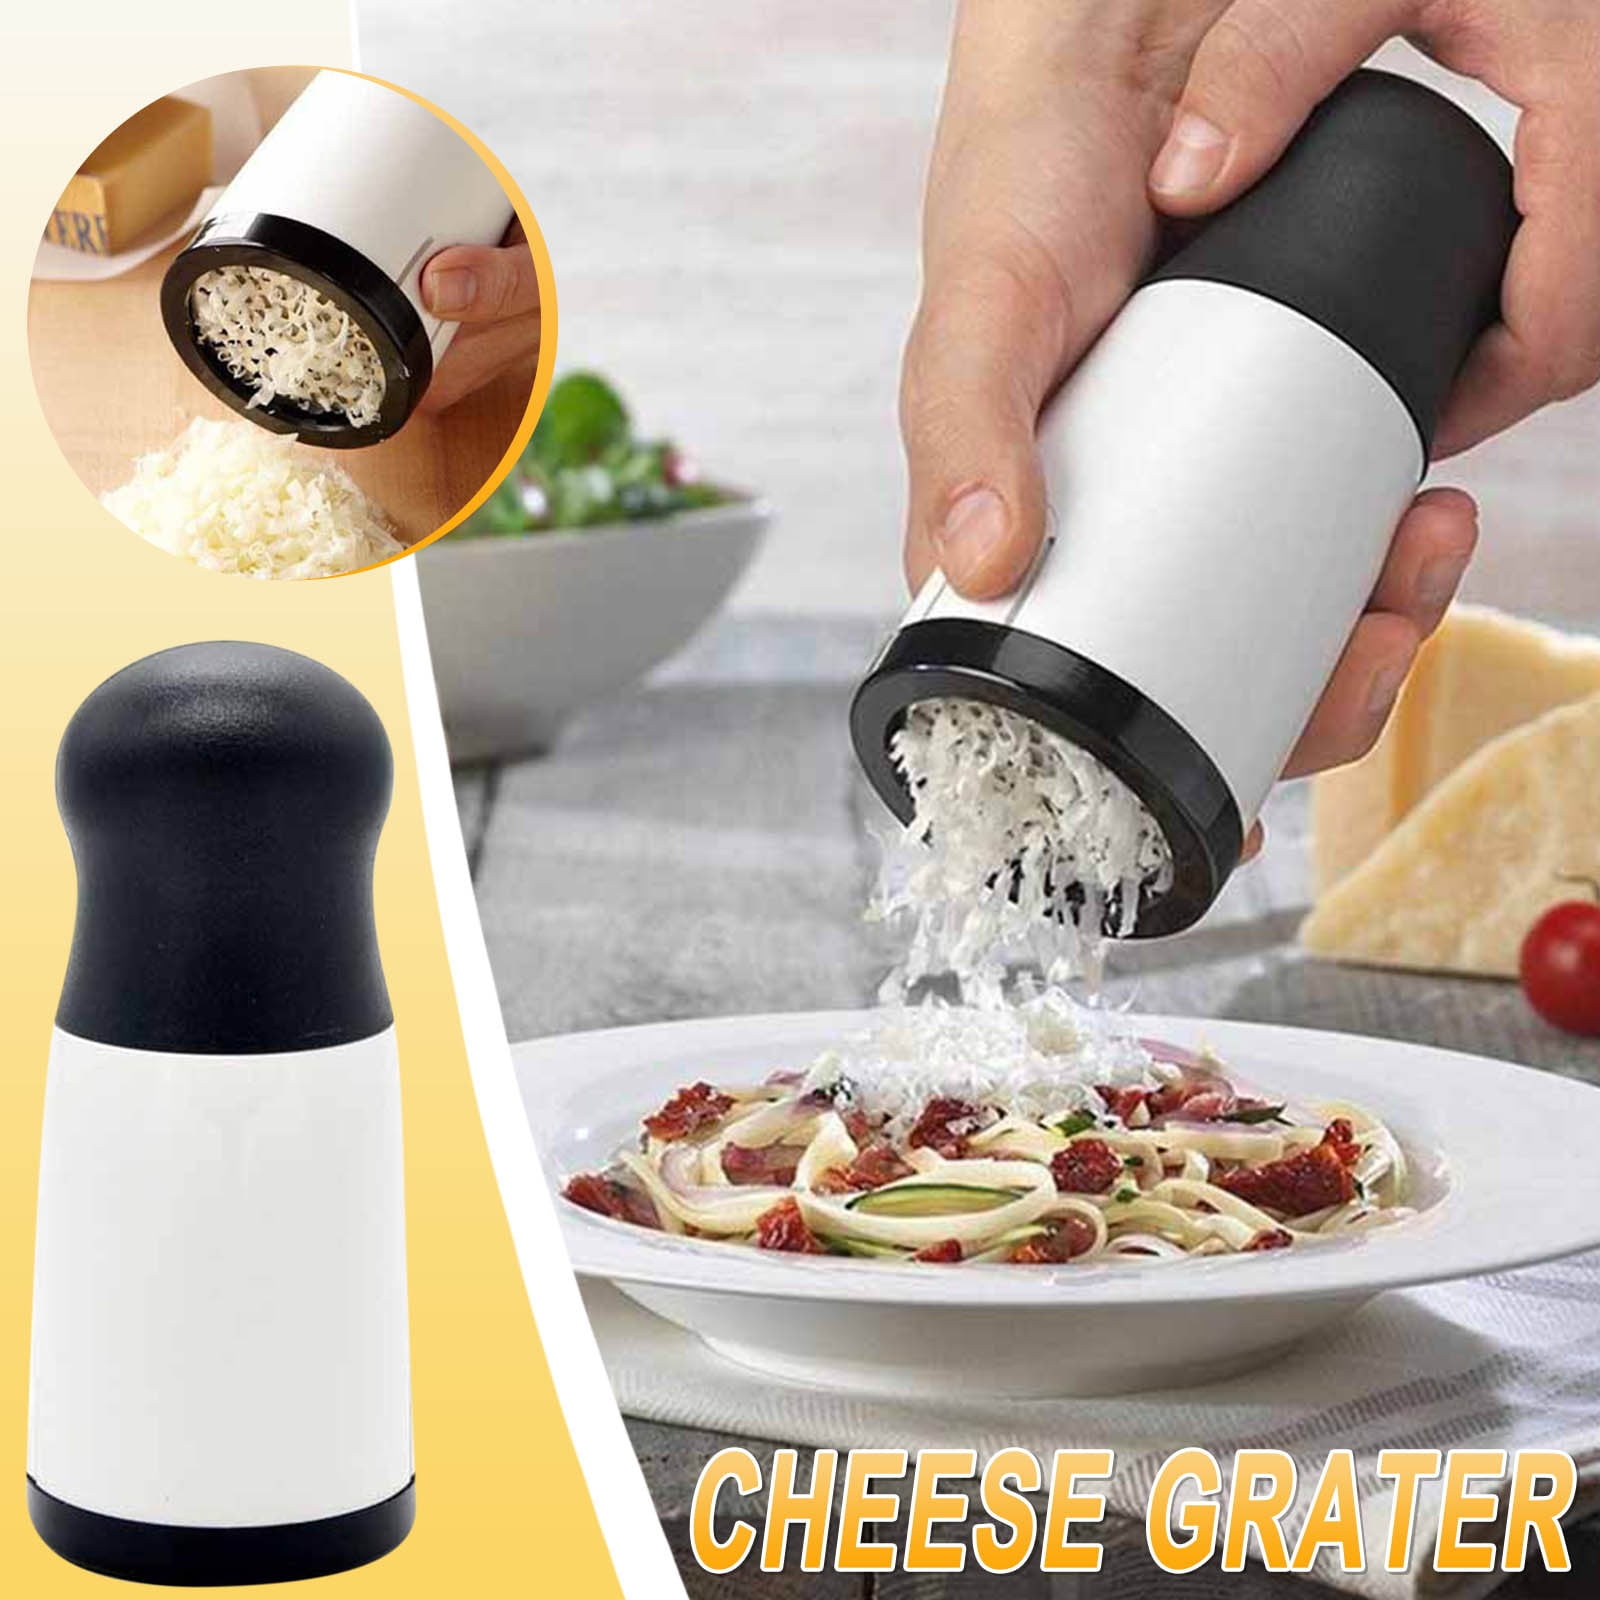 EIMELI Stainless Steel Handheld Cheese Grater–Comfort Non-Slip Handle and  Razor Sharp Blades–Easily Grates All Types of Cheeses Fruits Vegetables and  More–Dishwasher Safe Easy to Clean 